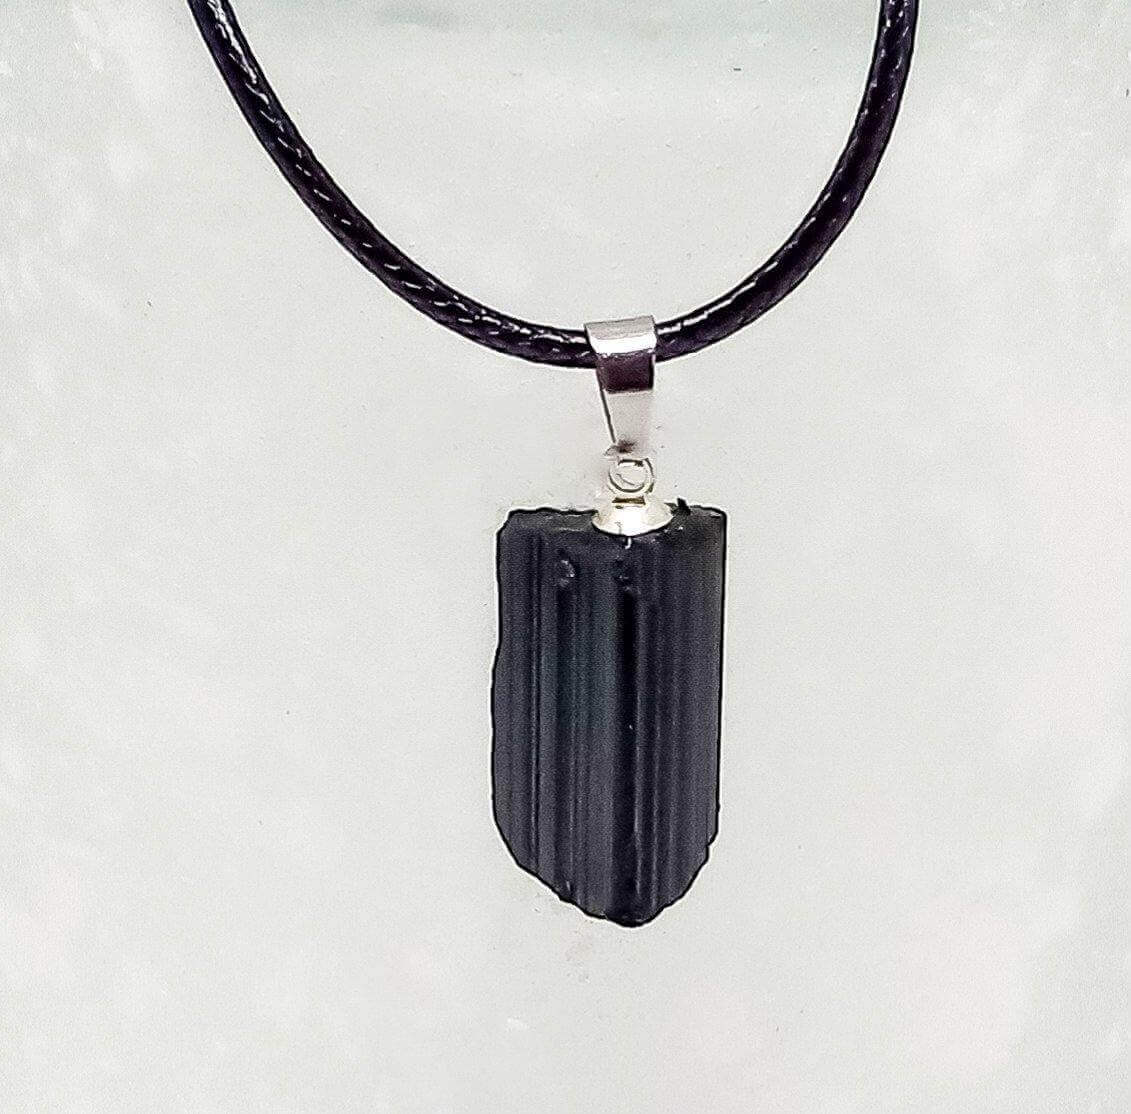 Amazon.com: Natural Black Tourmaline Pendant Necklace Energy Shield  Protection Jewelry Cord necklace Men Women : Handmade Products